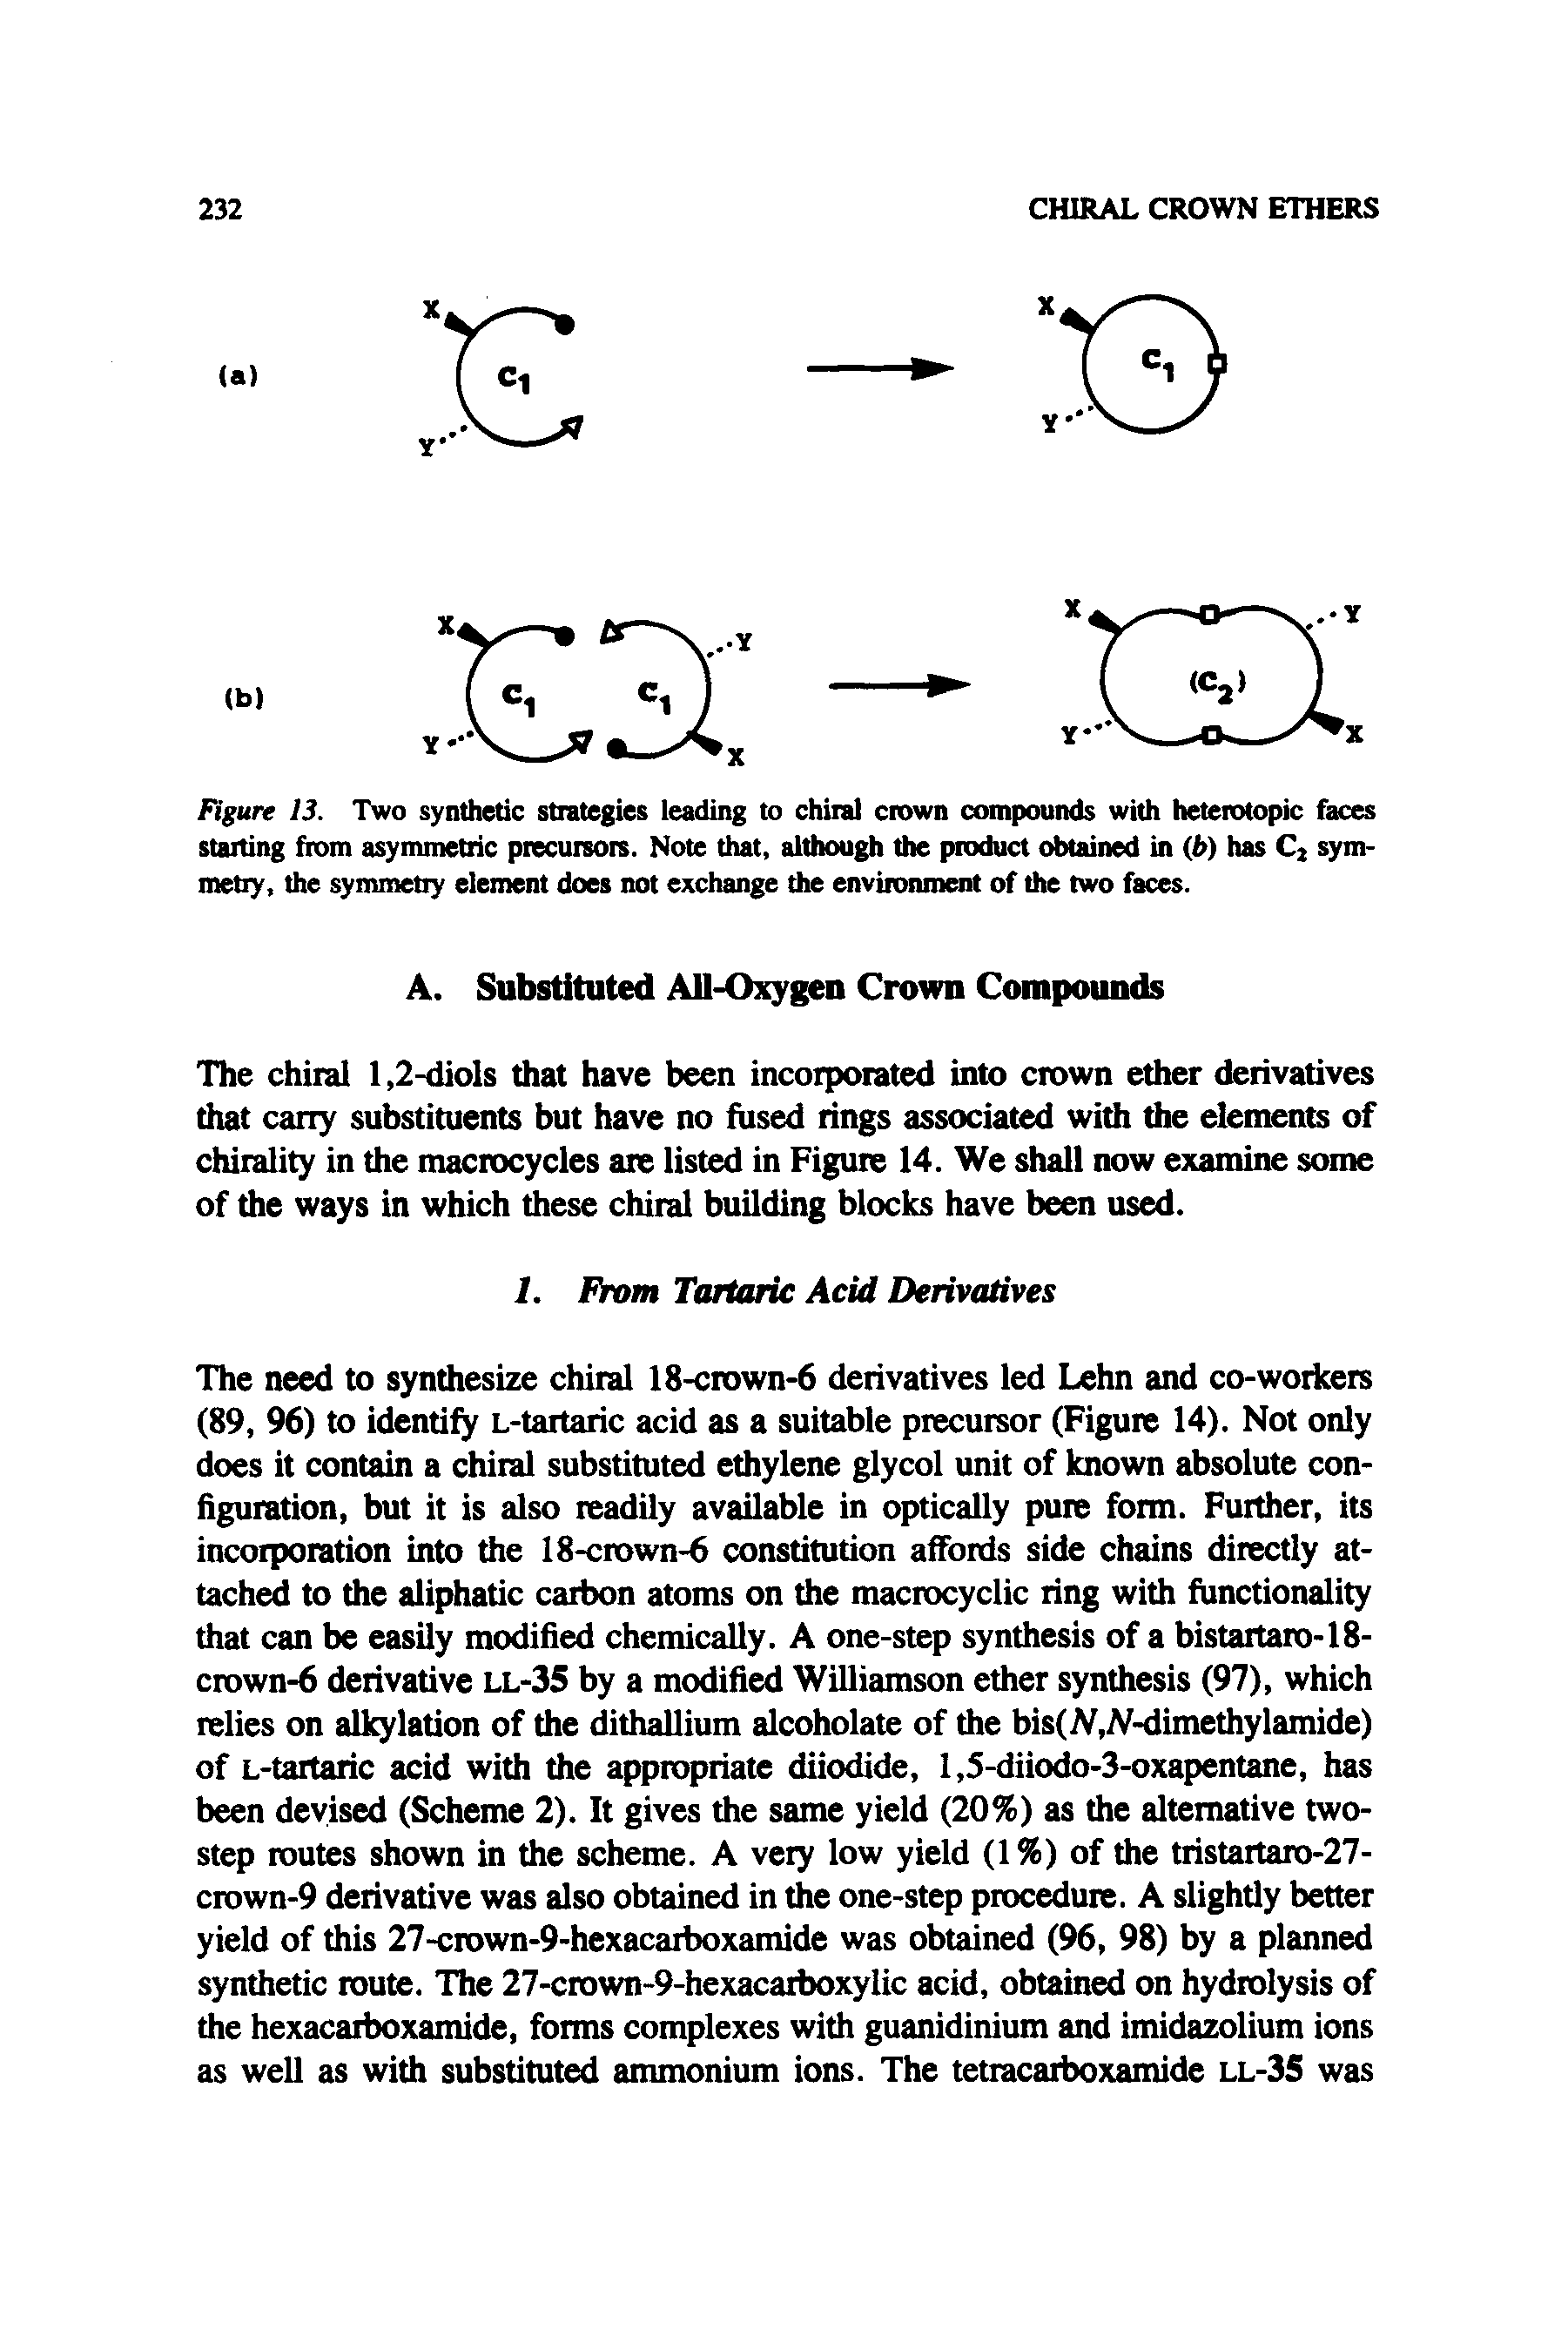 Figure 13. Two synthetic strategies leading to chiral crown compounds with heterotopic faces starting from asymmetric precursors. Note that, although the product obtained in (b) has Cj symmetry, the symmetry element does not exchange the environment of the two faces.